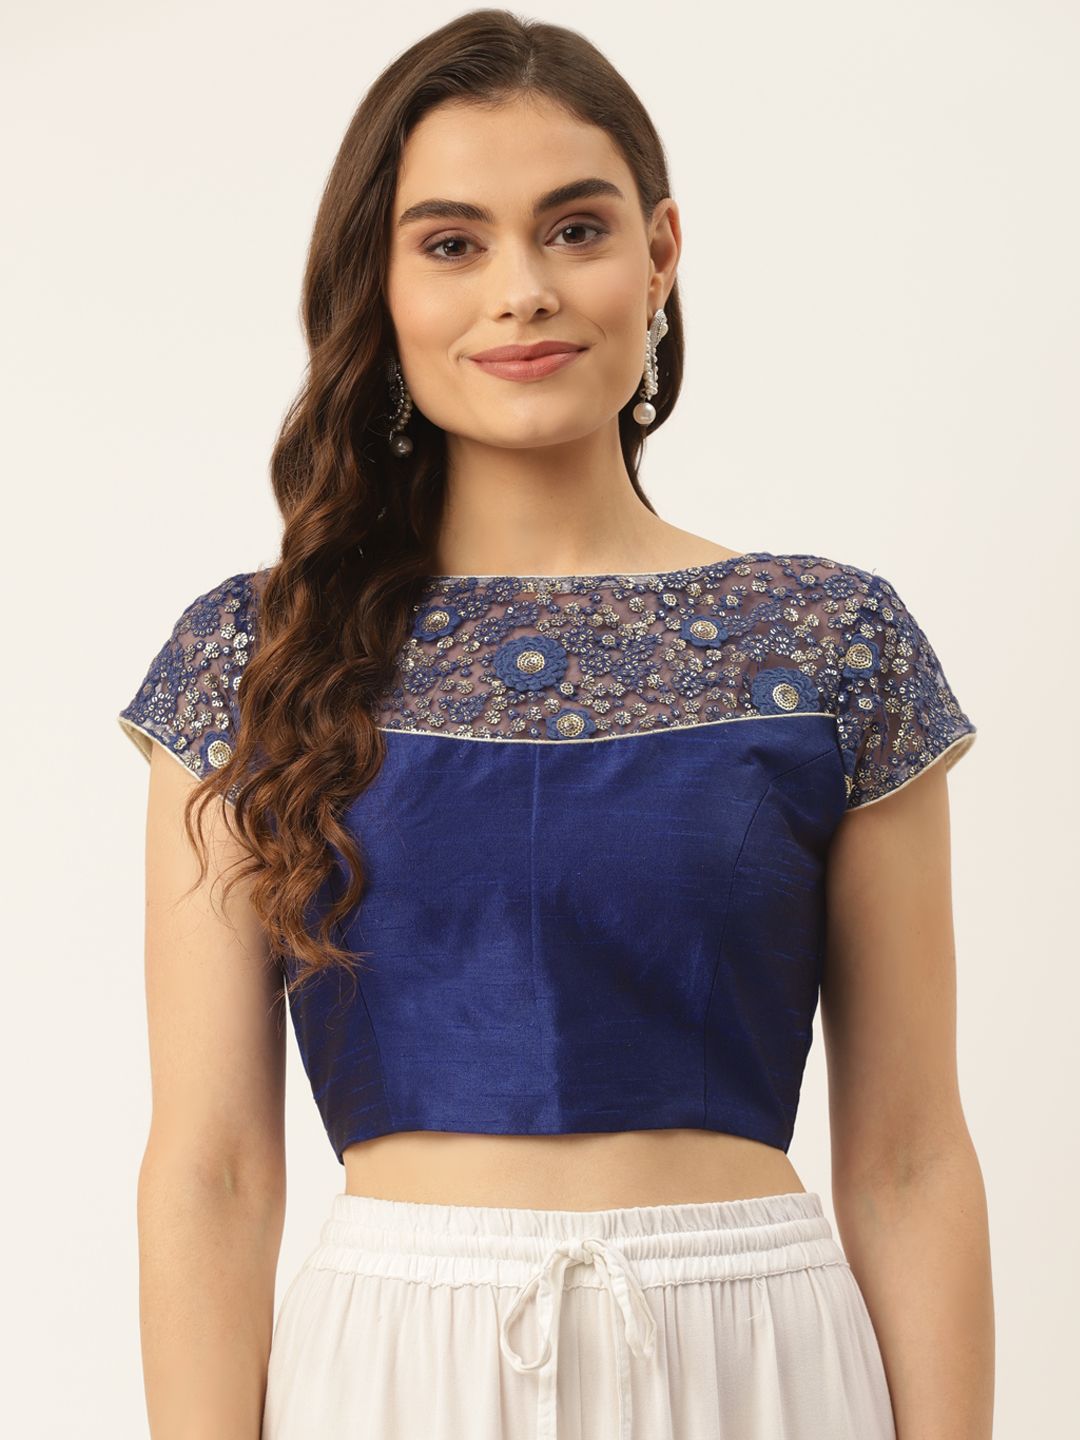 NDS Niharikaa Designer Studio Blue Thread Work Embroidered Readymade Blouse Price in India